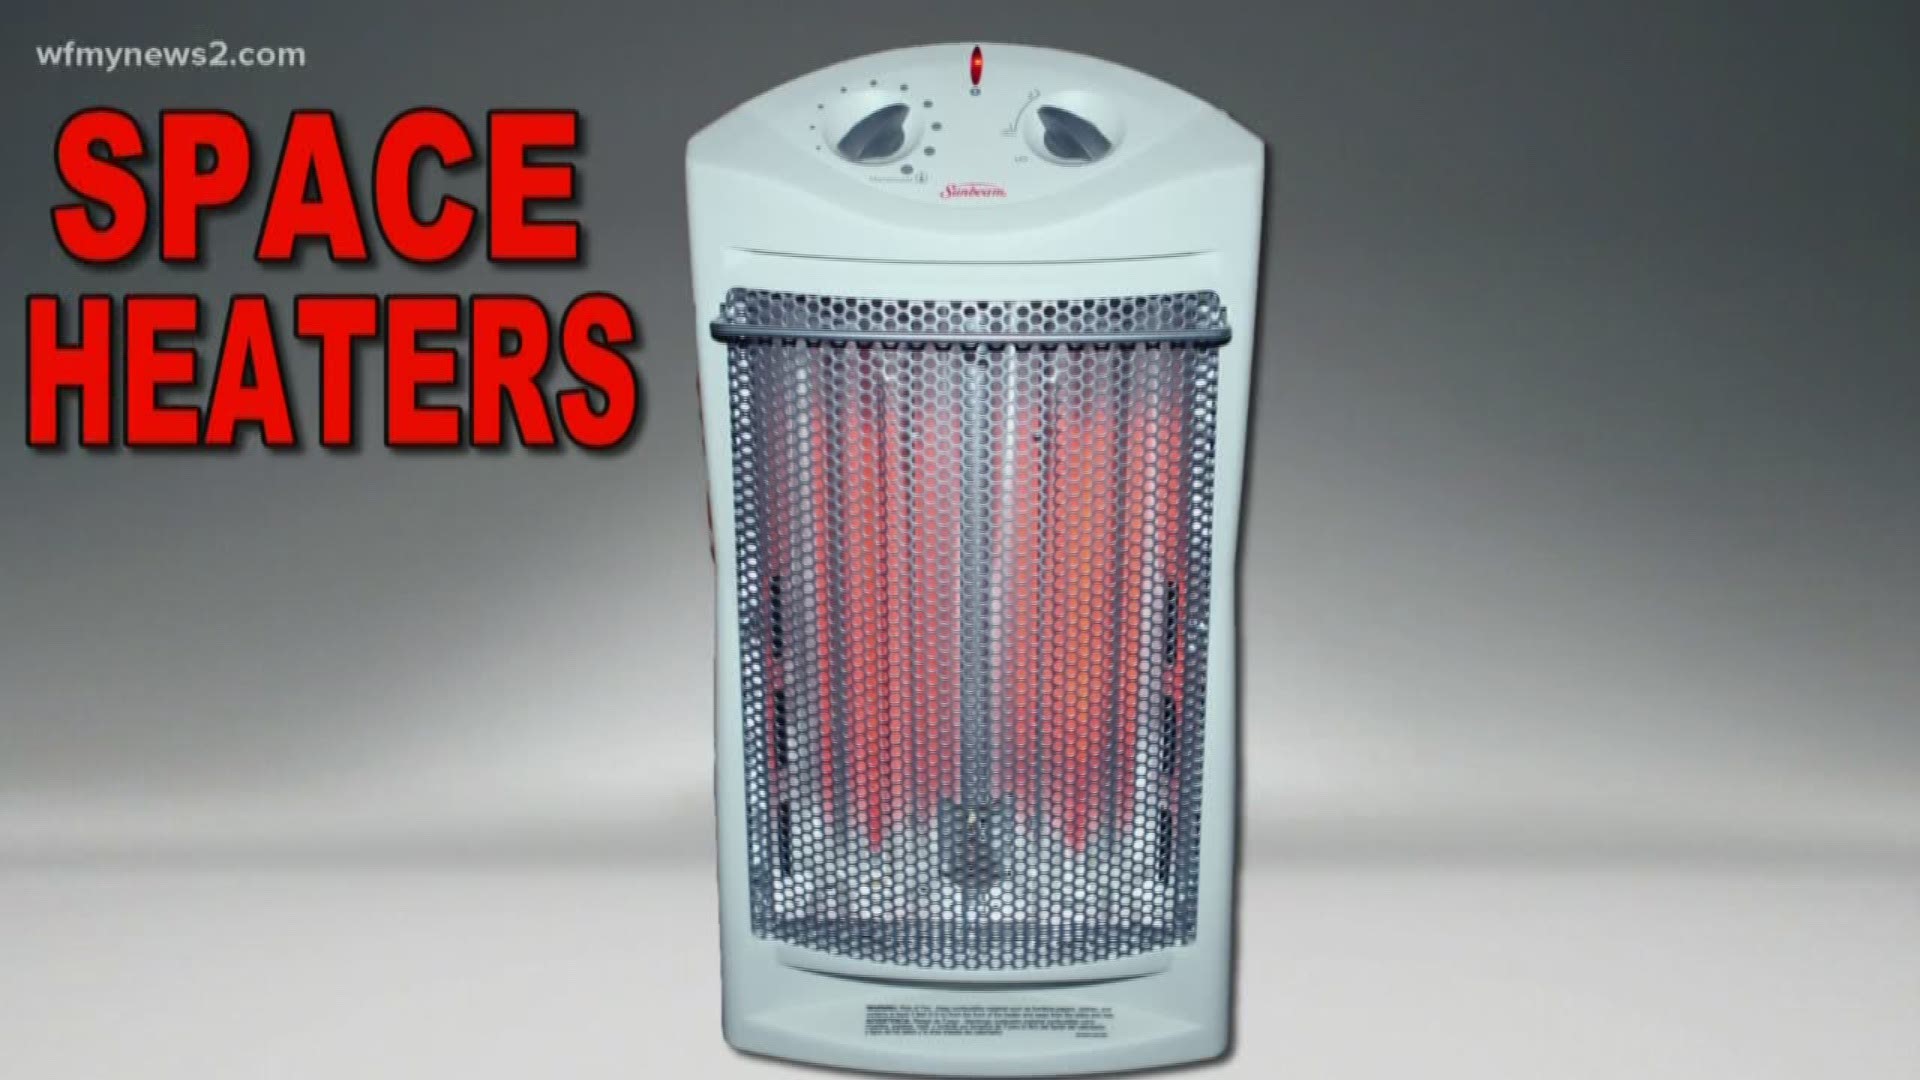 A chilly bathroom is not a friendly place. If you must use a space heater, follow these guidelines.